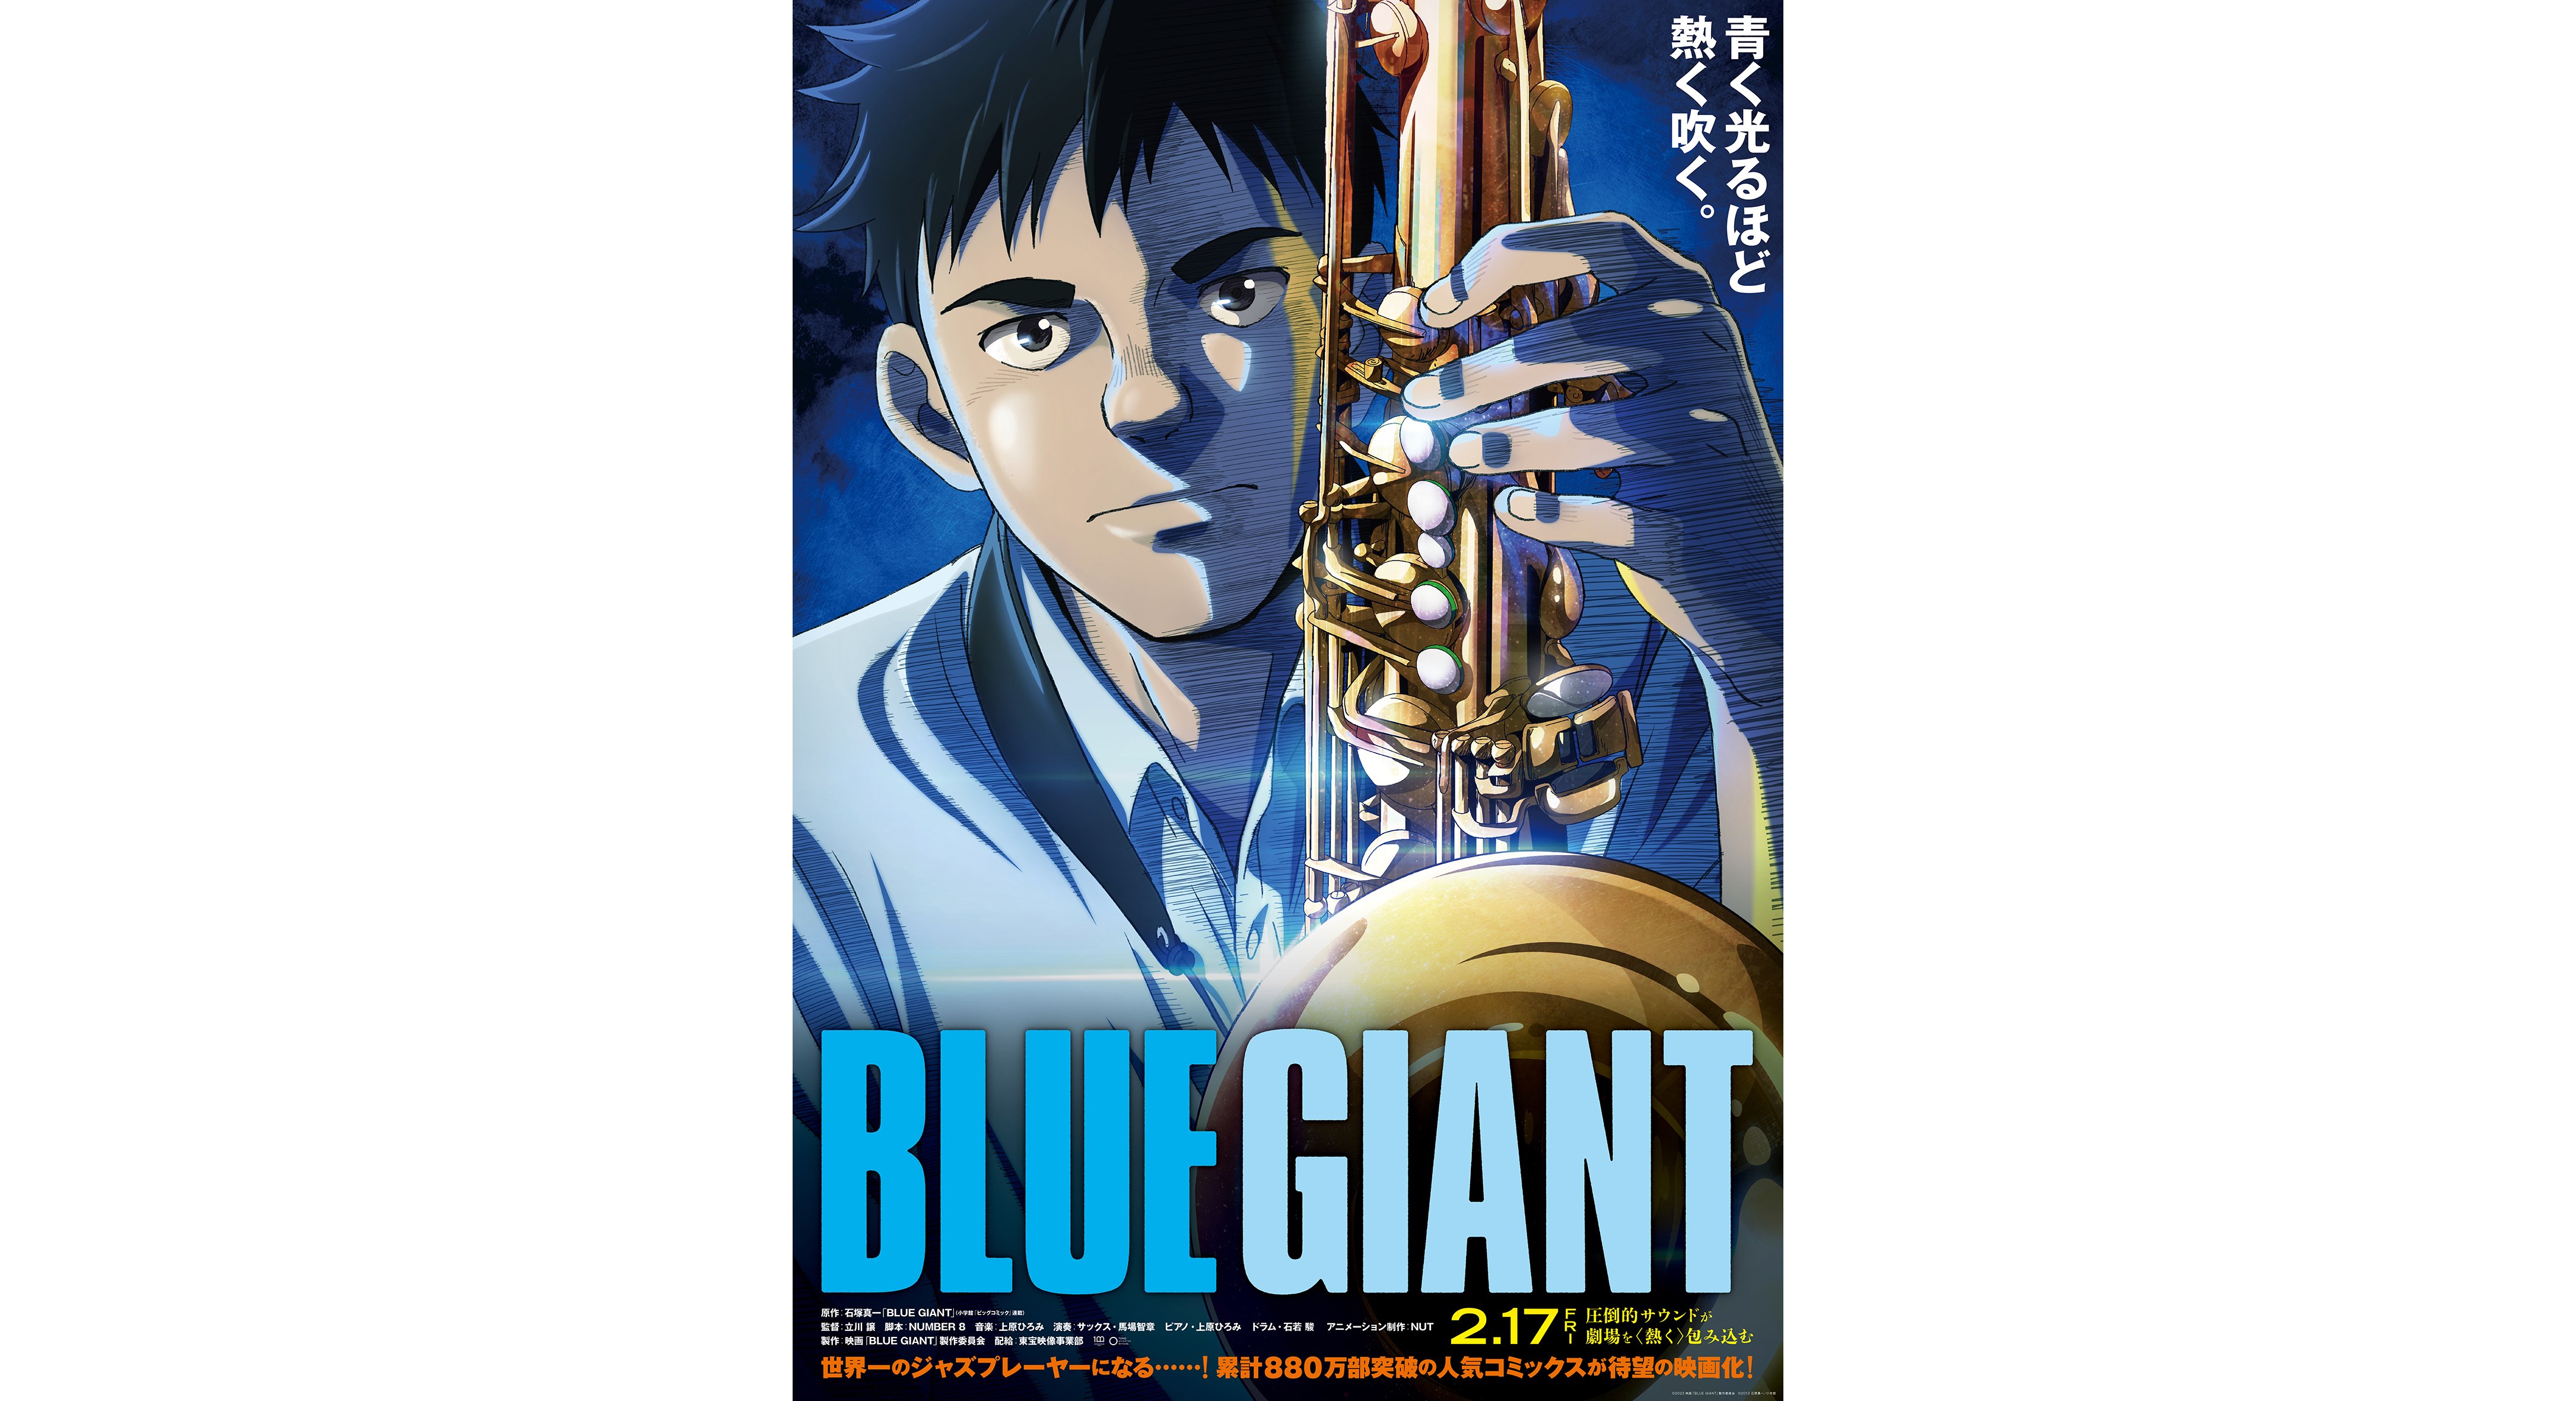 Blue Giant Anime Film's Teaser Trailer Hints at Incredible Jazz